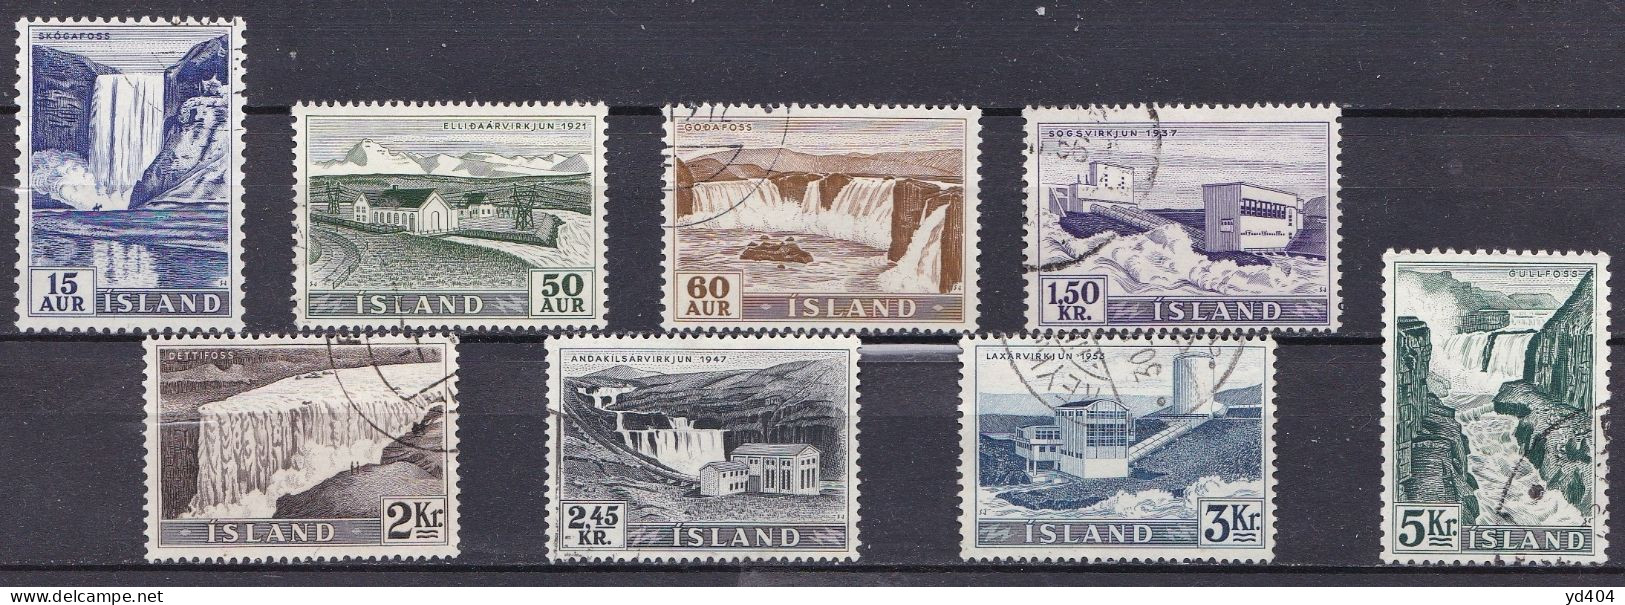 IS060B – ISLANDE - ICELAND - 1956 – WATERFALLS - SG # 335/42 USED 22,25 € - Used Stamps